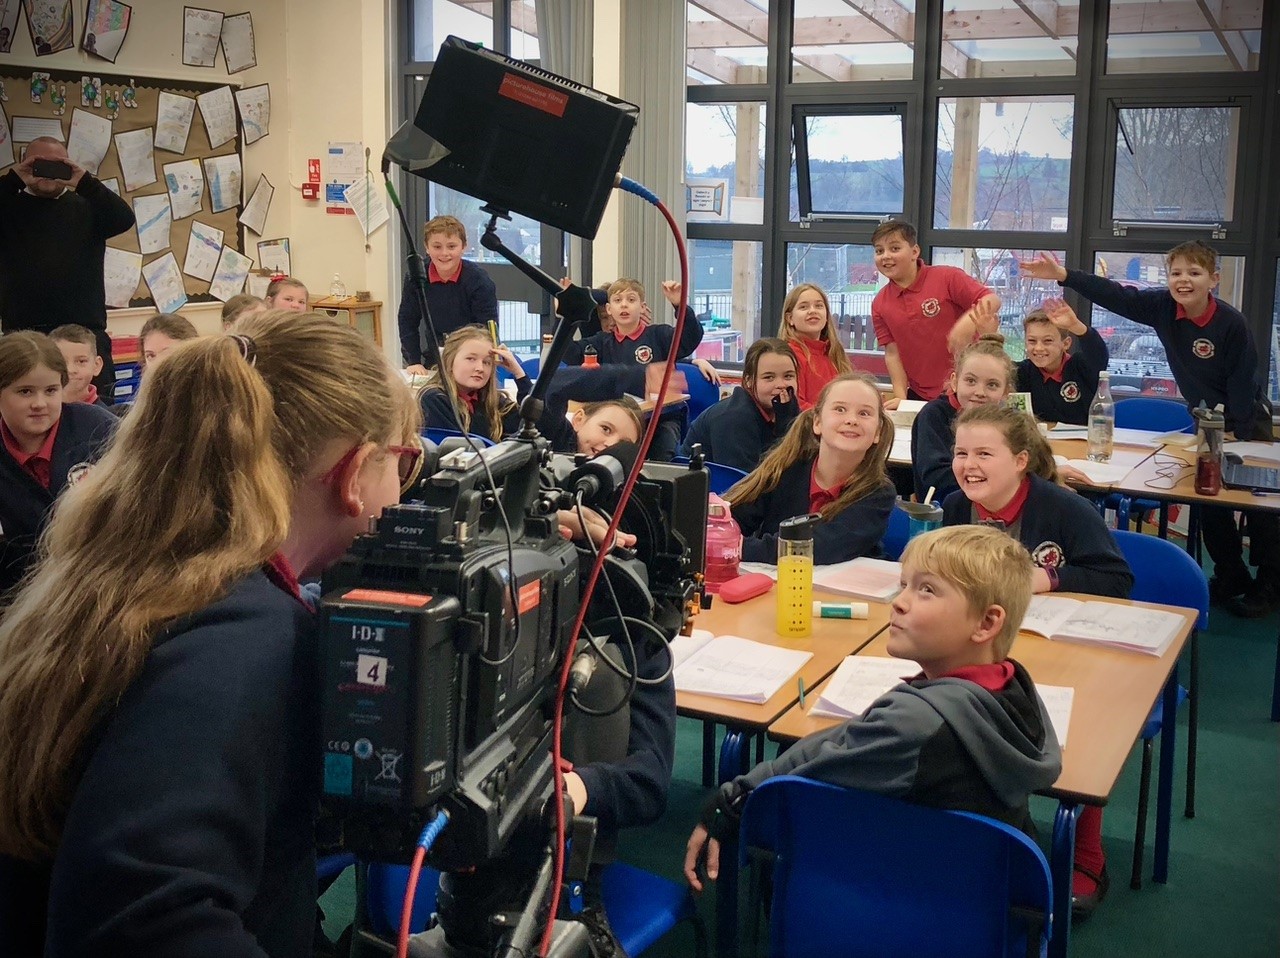 School pupils are filmed by a pupil using a large video camera